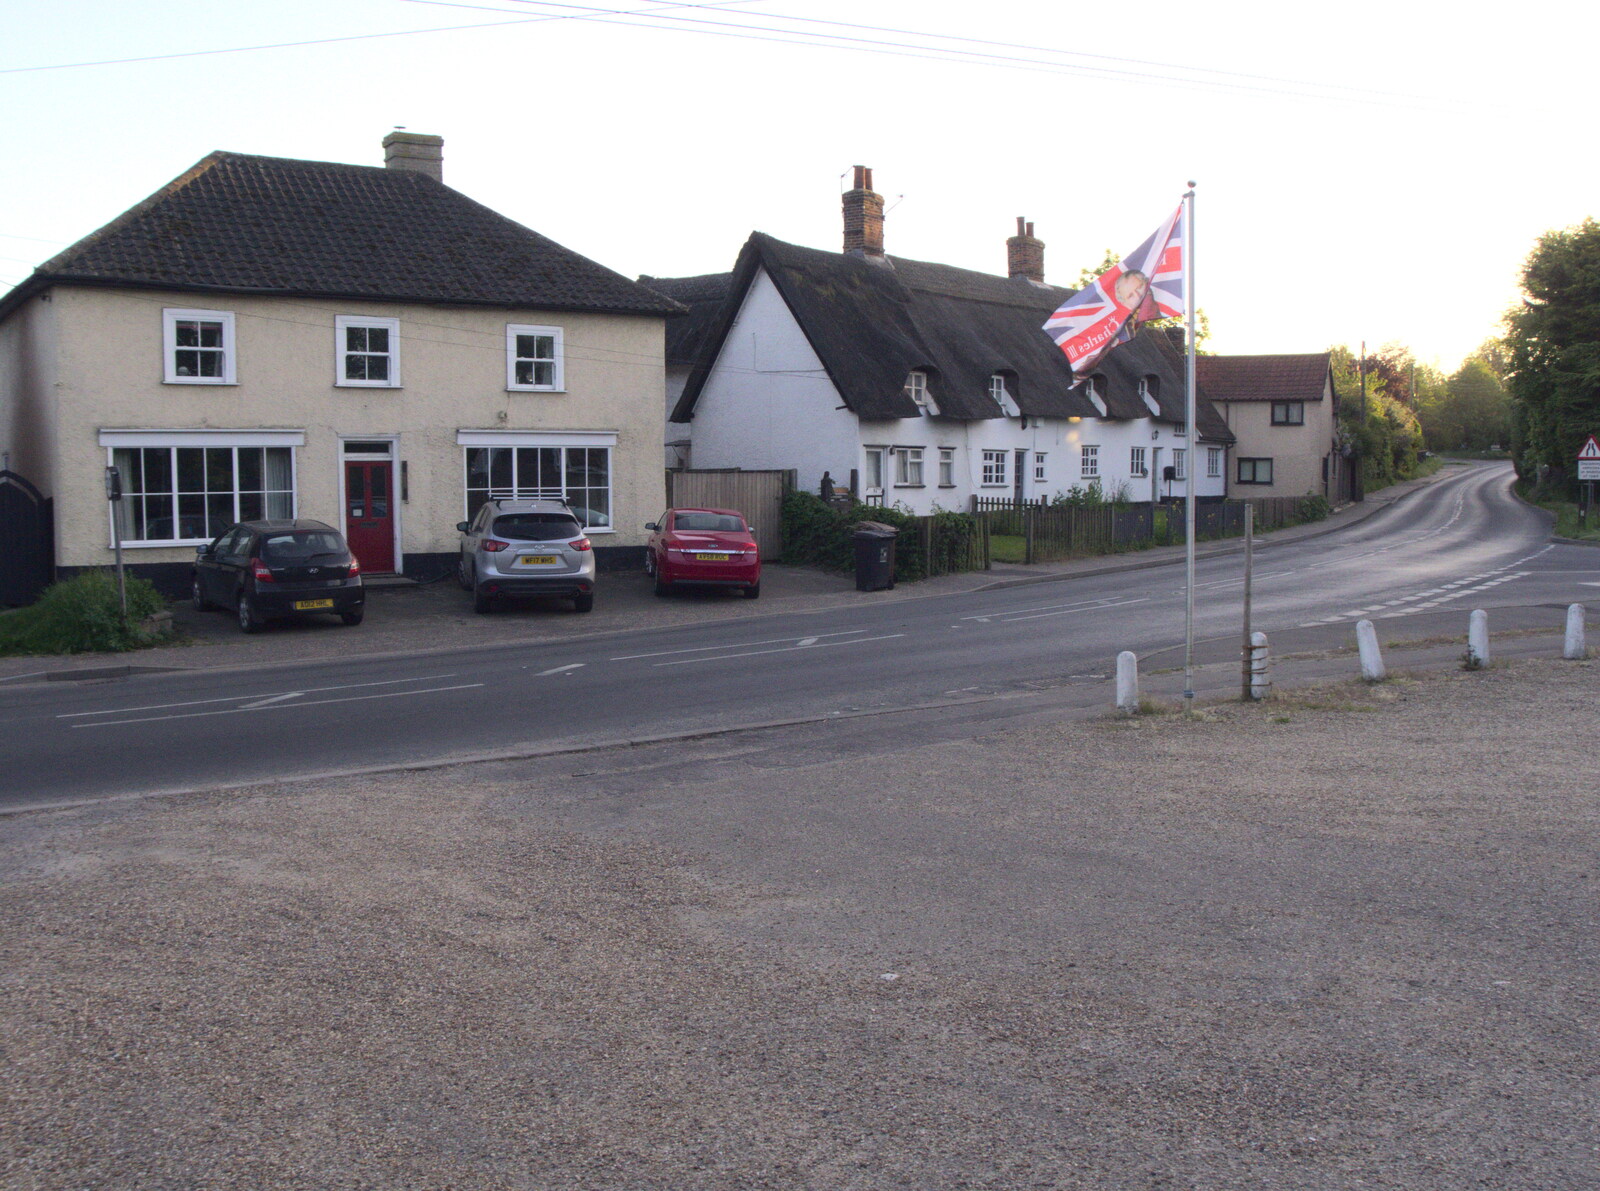 Houses on the A1066 Thetford Road from The BSCC at Rushall, South Lopham and Redgrave - 25th May 2023